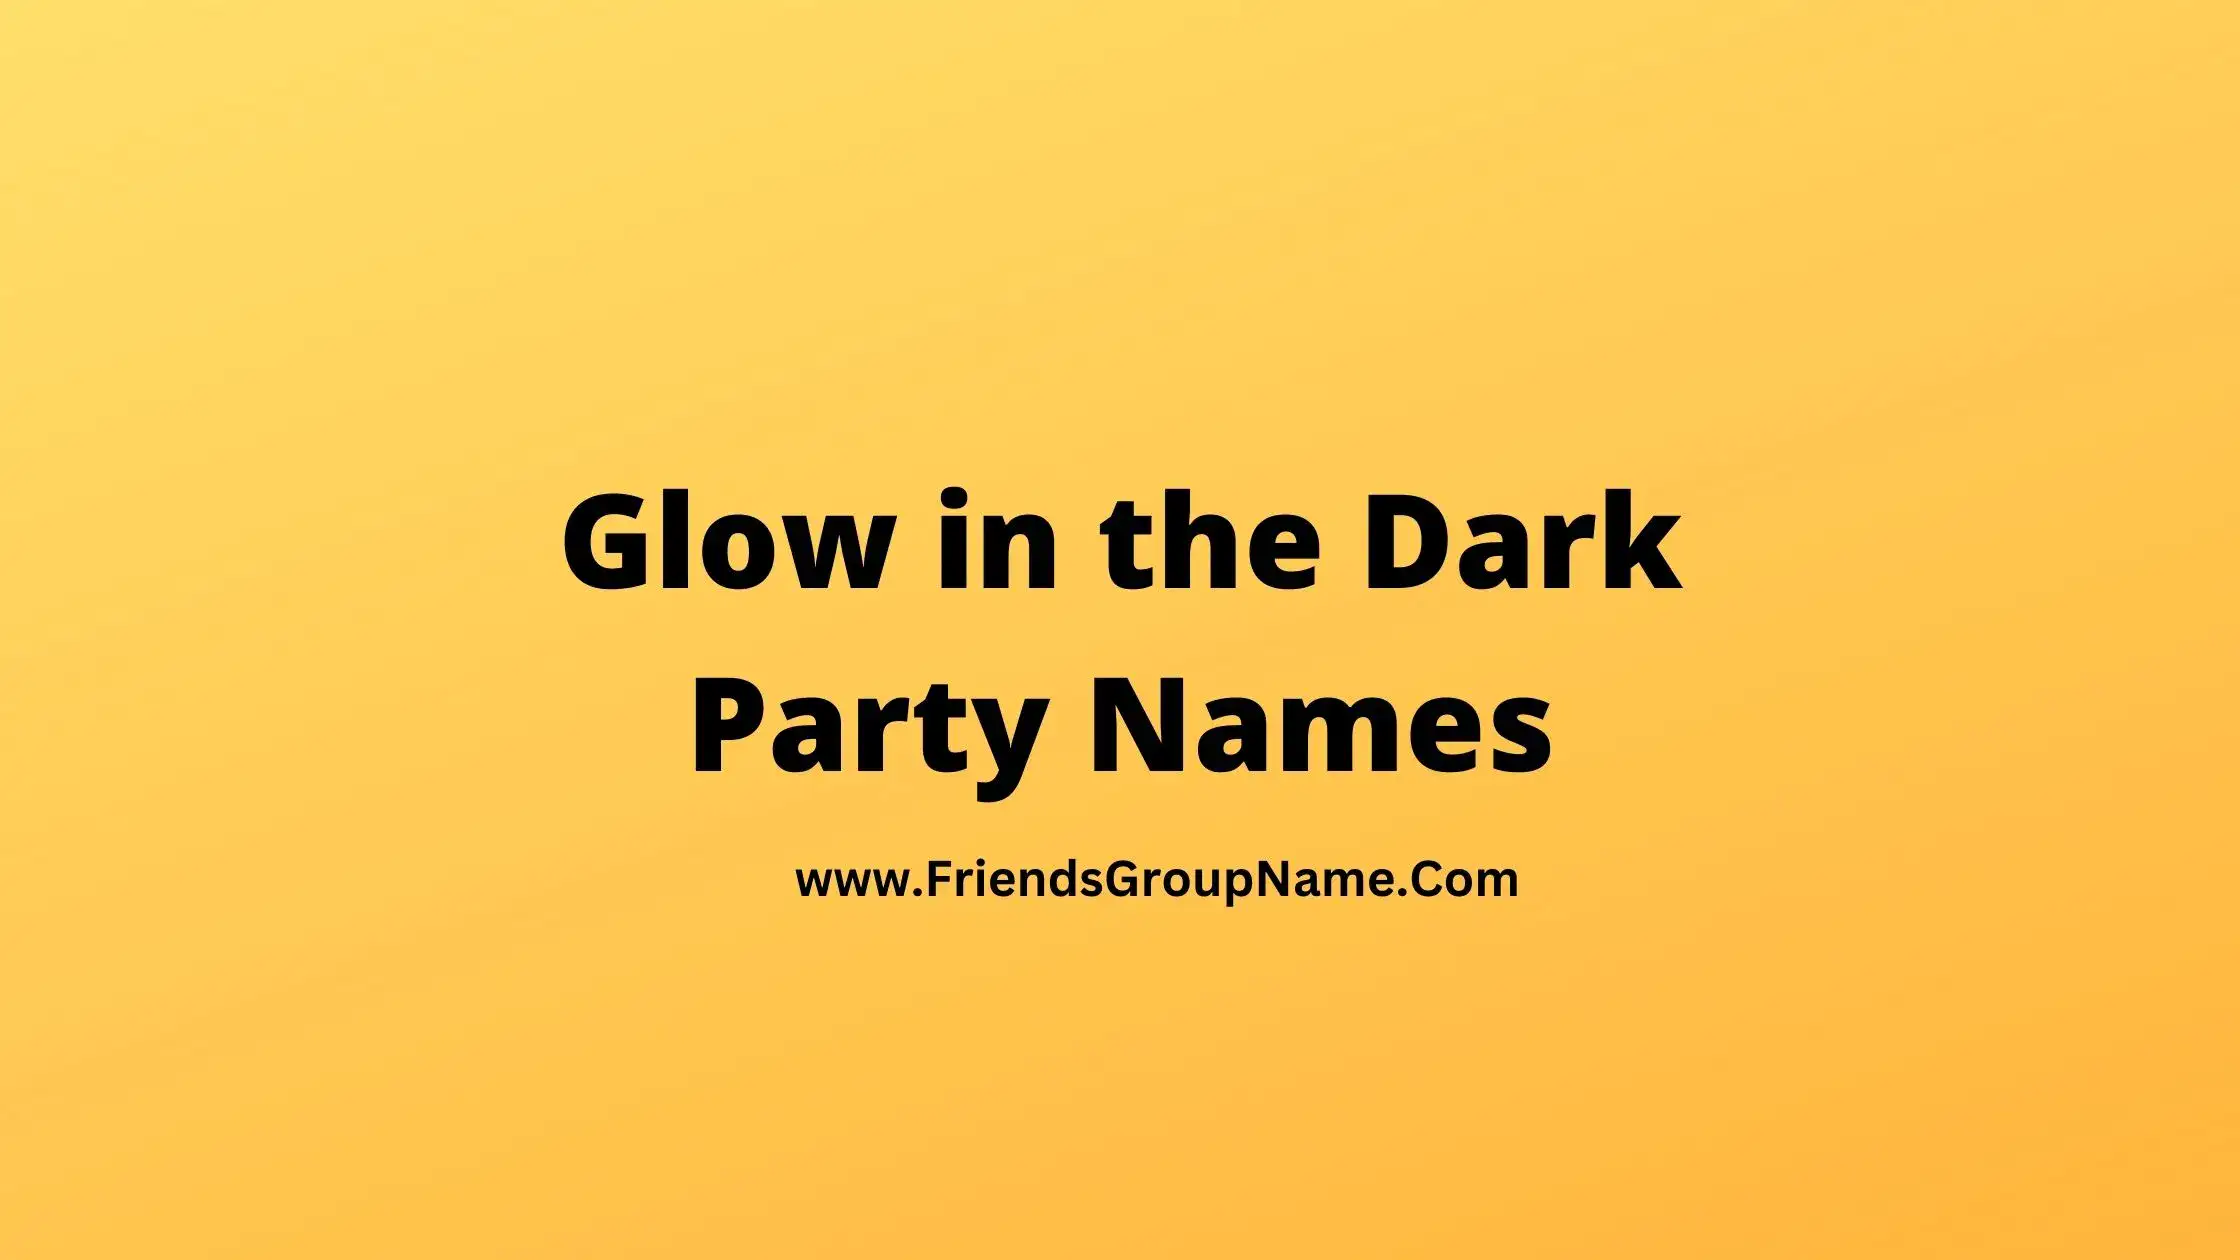 Glow in the Dark Party Names